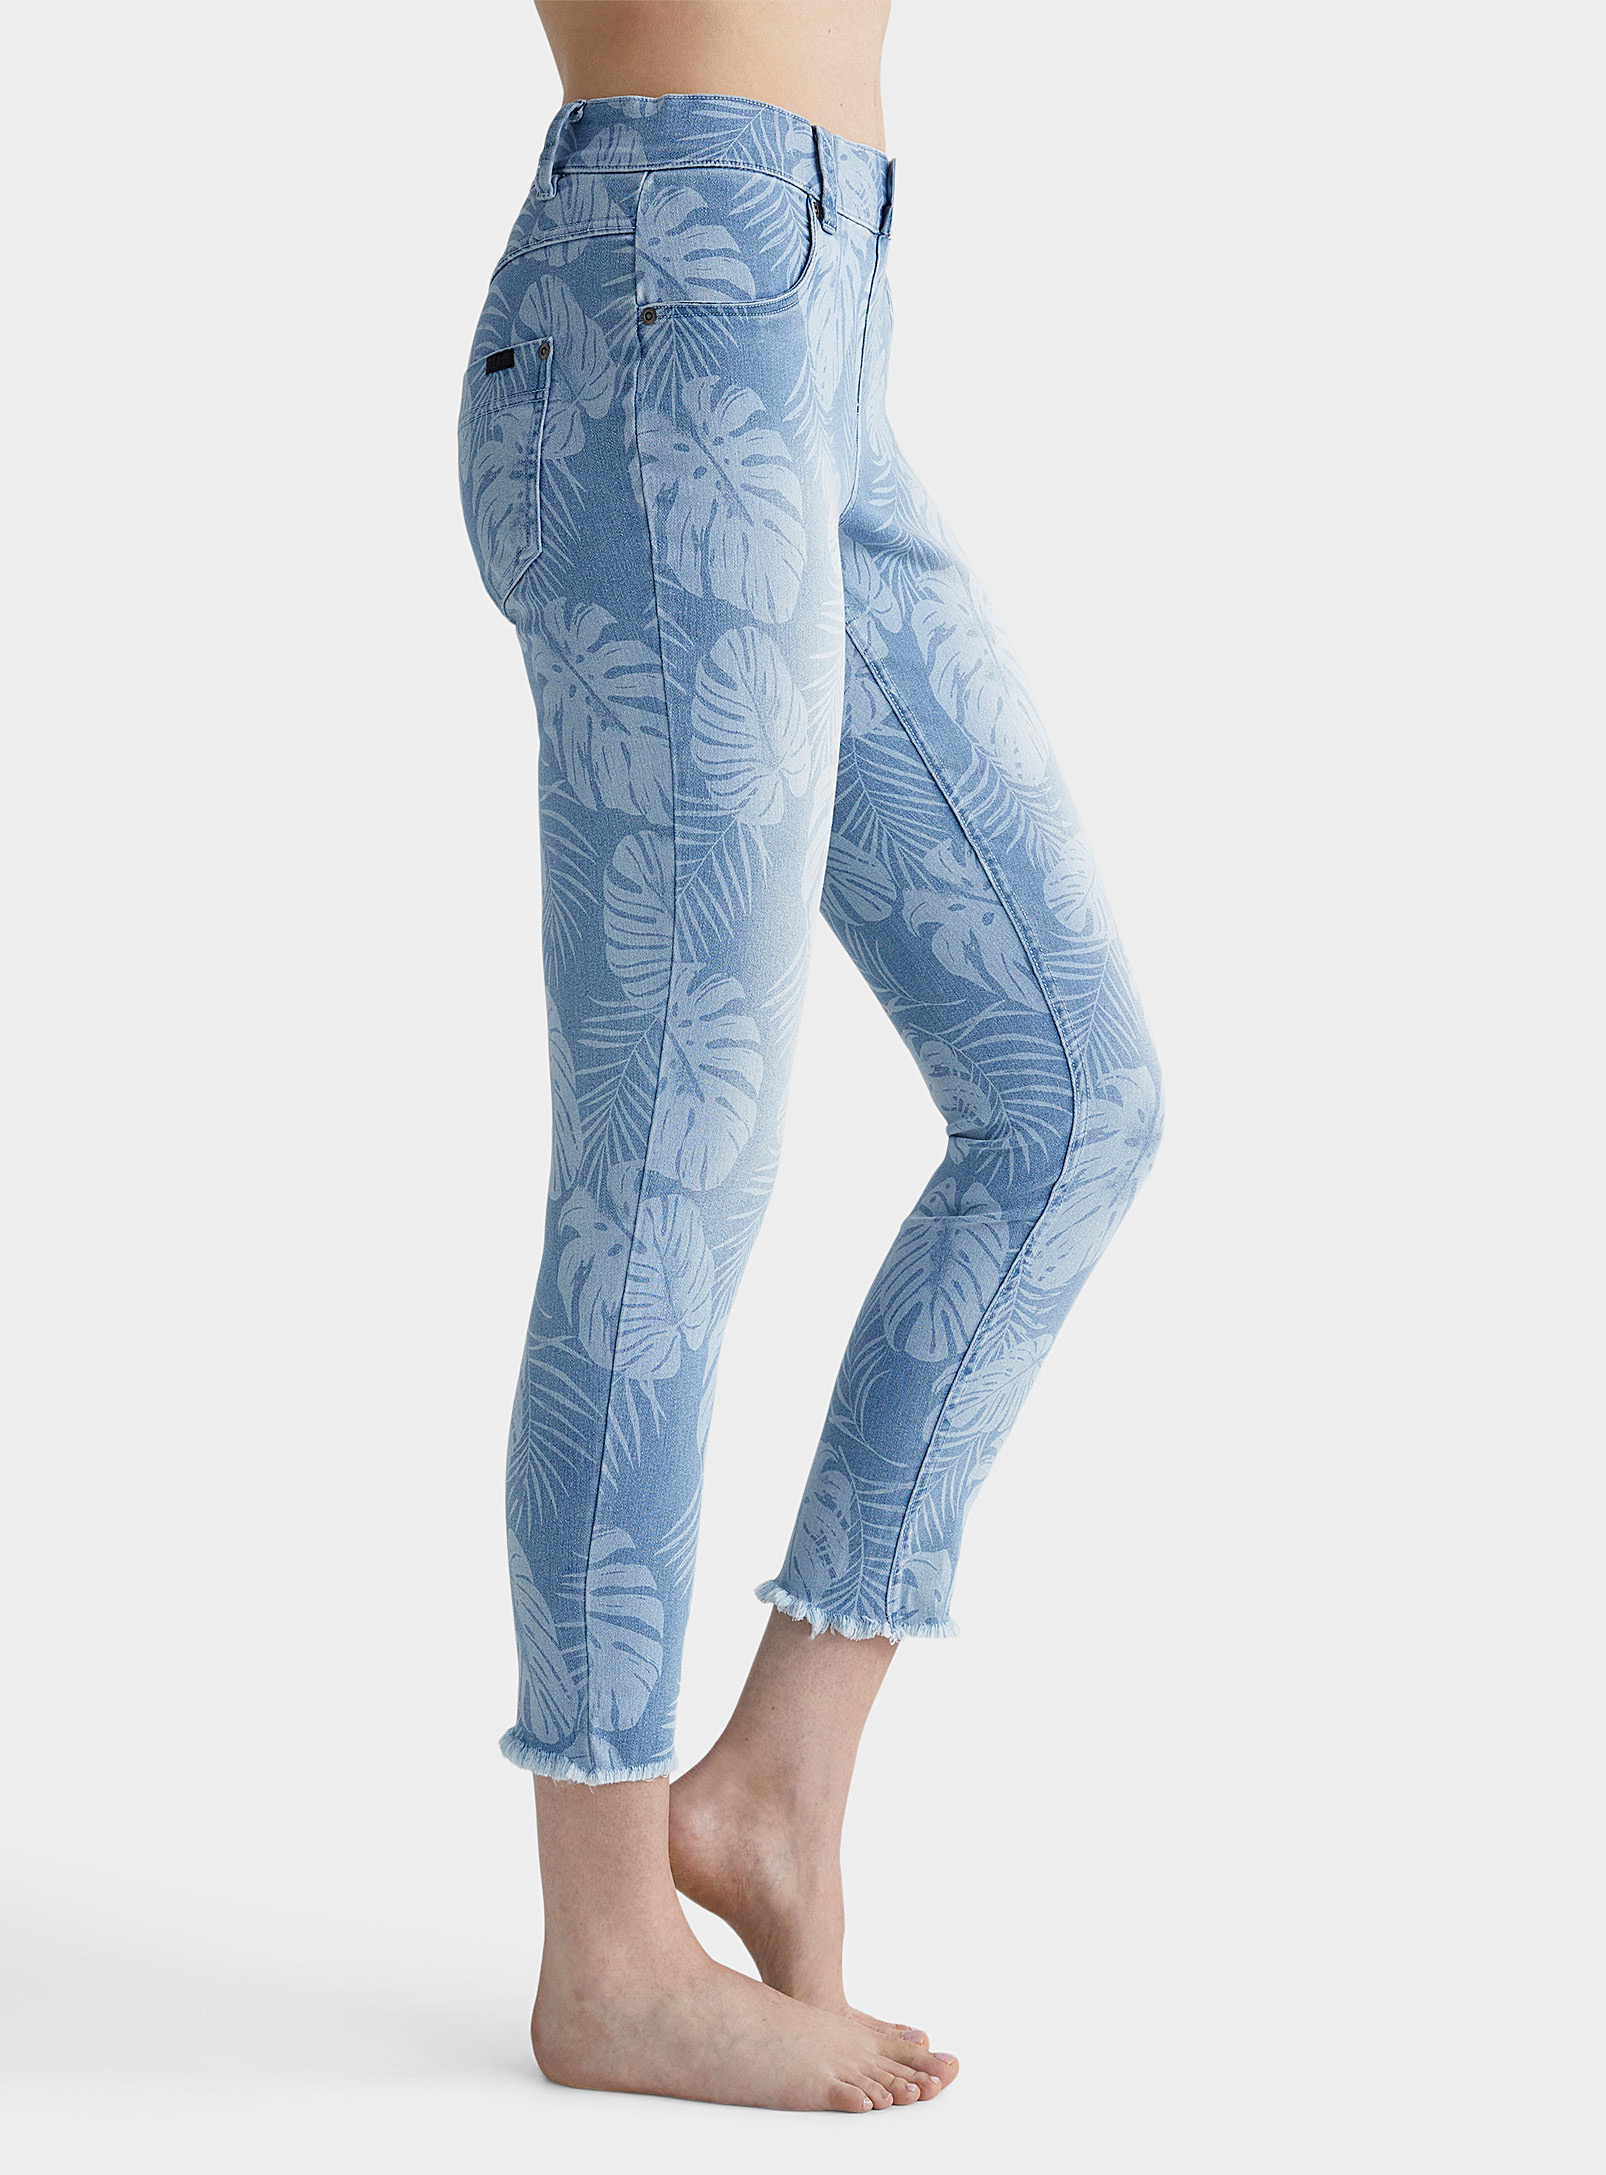 Hue - Women's Tropical faded fitted jegging